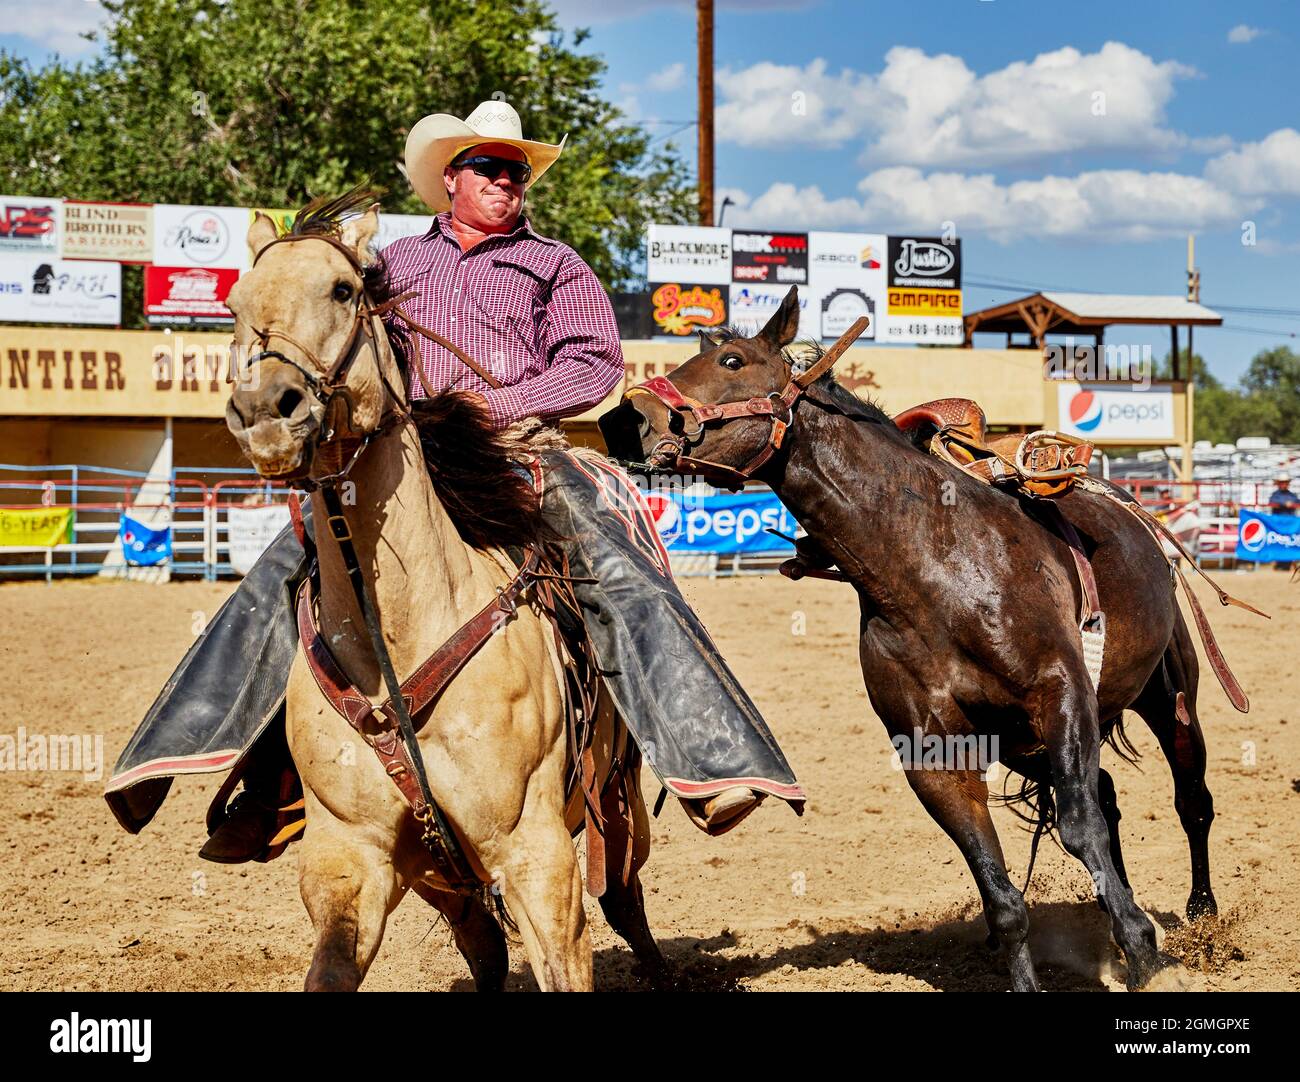 Prescott, Arizona, USA - September 12, 2021: Cowboy riding on a horse while trying to catch a bucking horse  at the rodeo competition held at the Pres Stock Photo